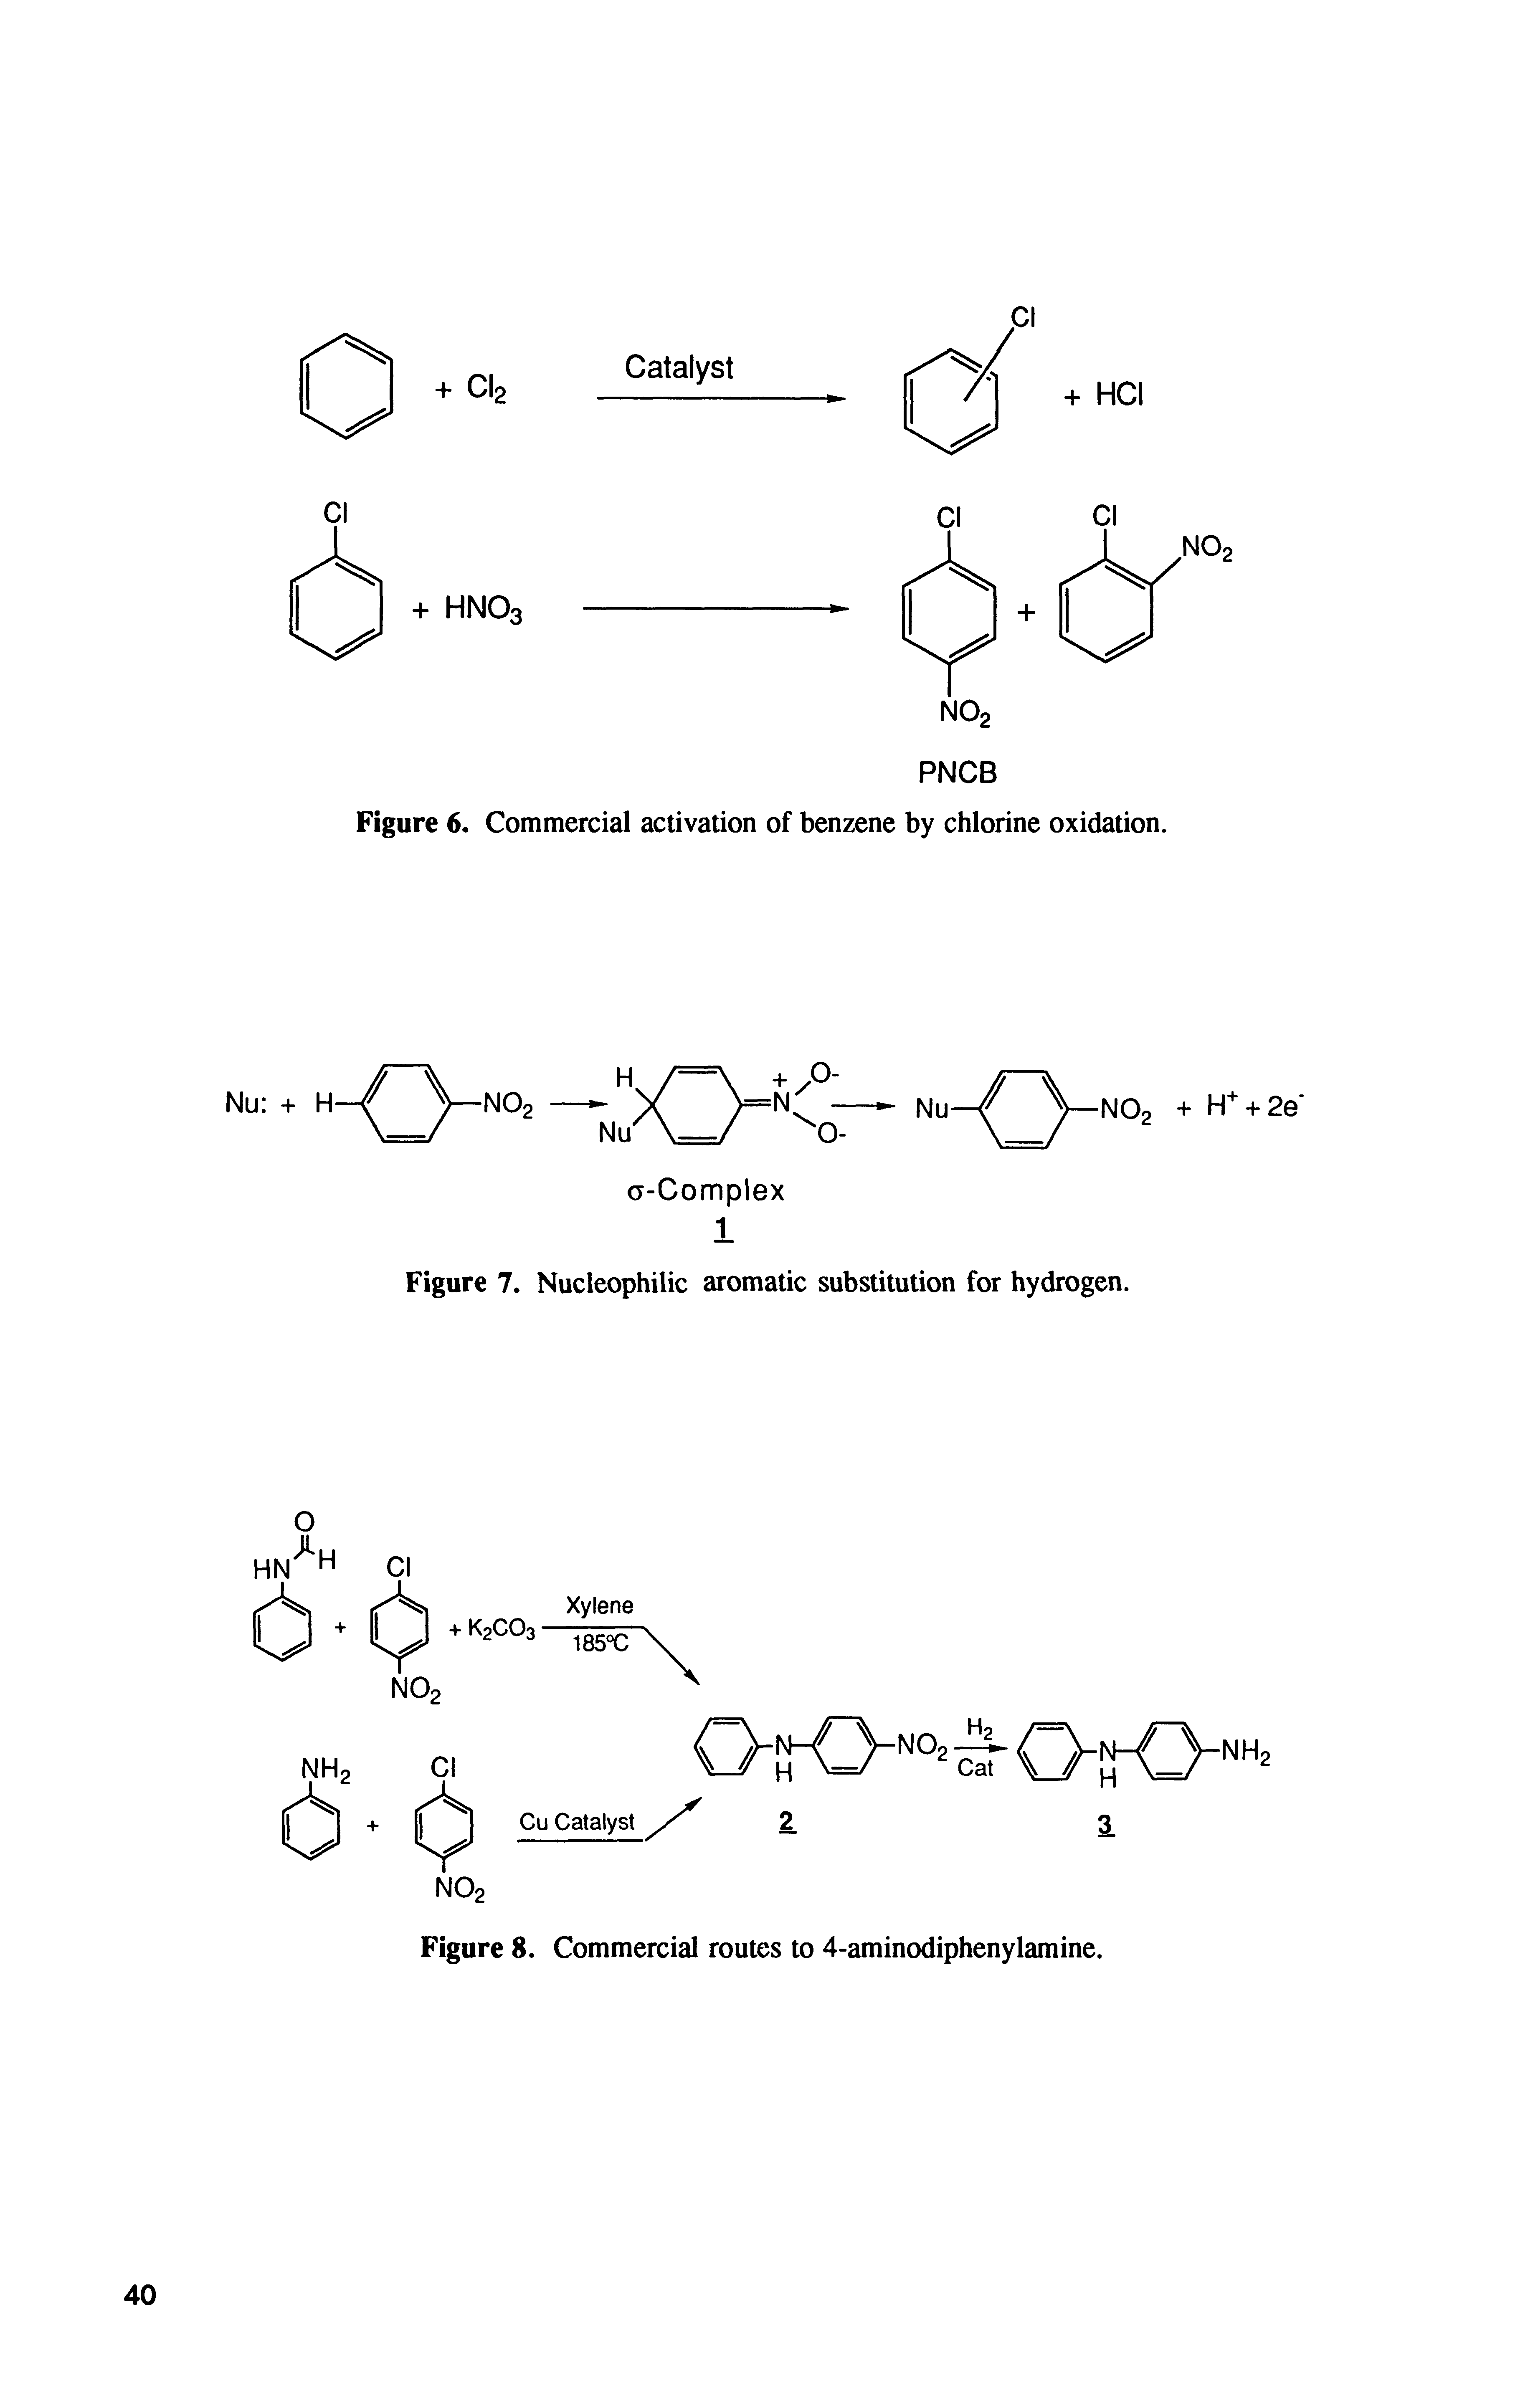 Figure 6. Commercial activation of benzene by chlorine oxidation.